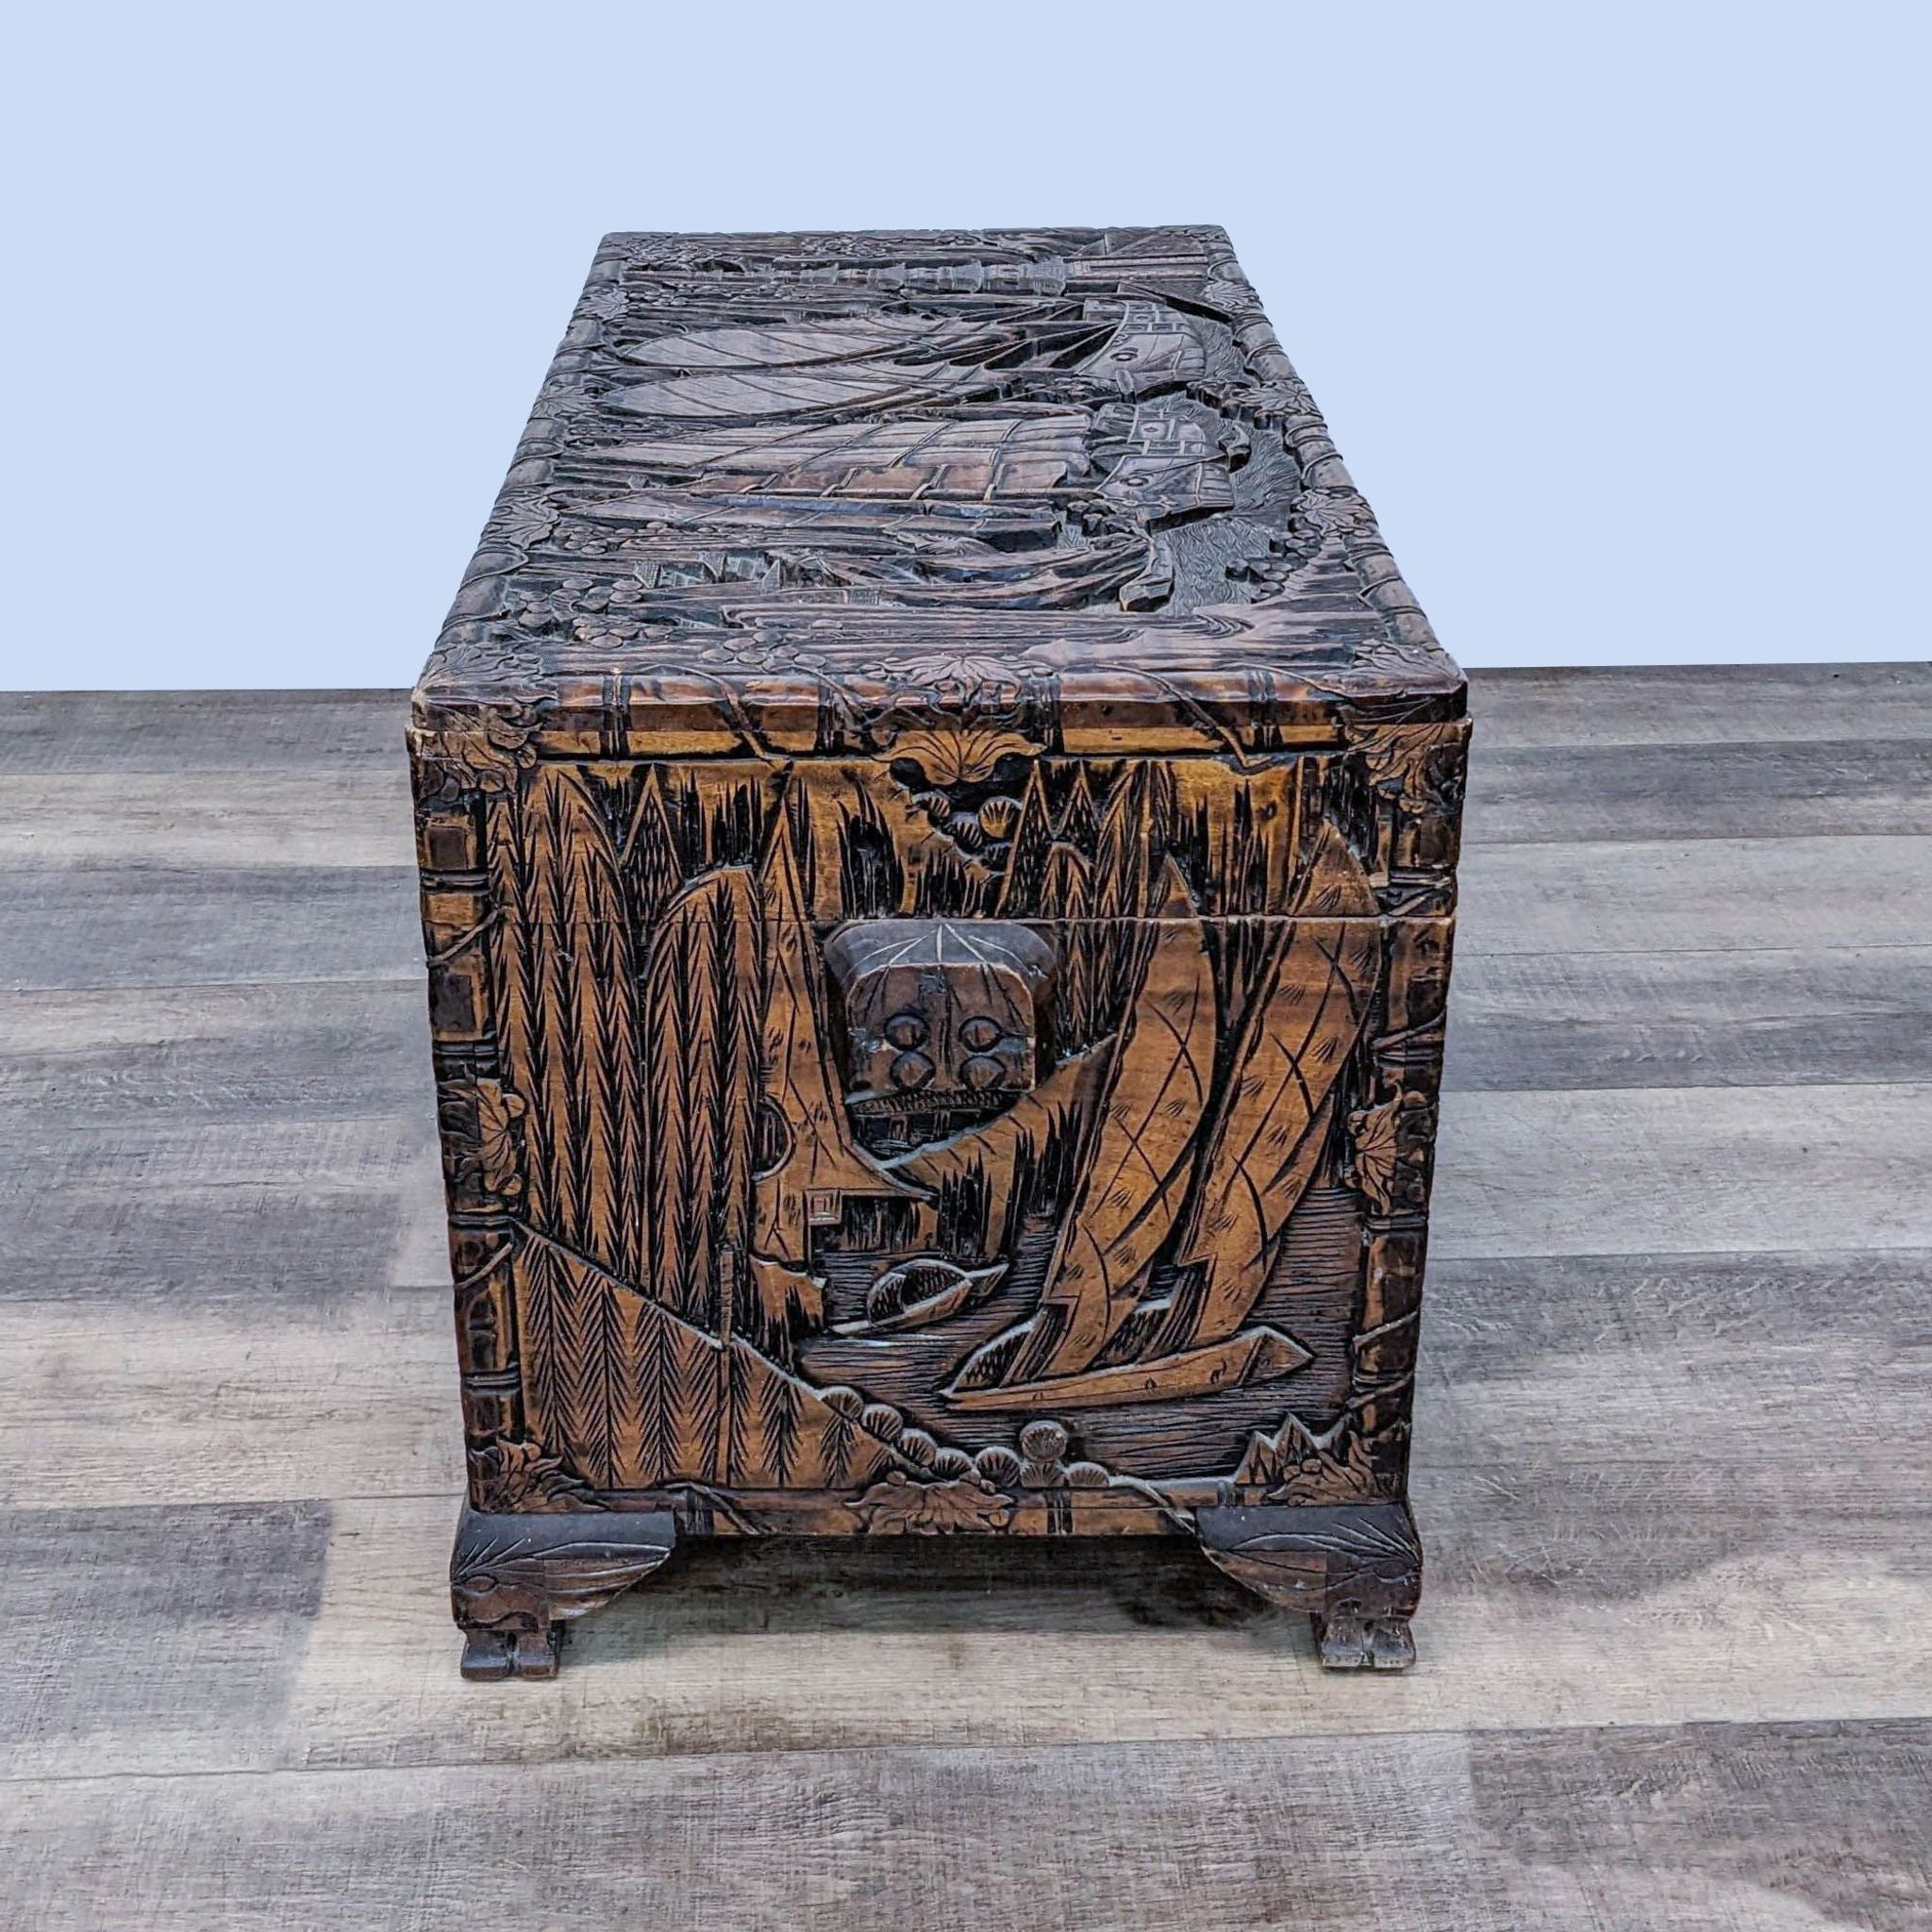 Antique-style Reperch trunk featuring detailed maritime carvings on its sides and top, positioned end-on.